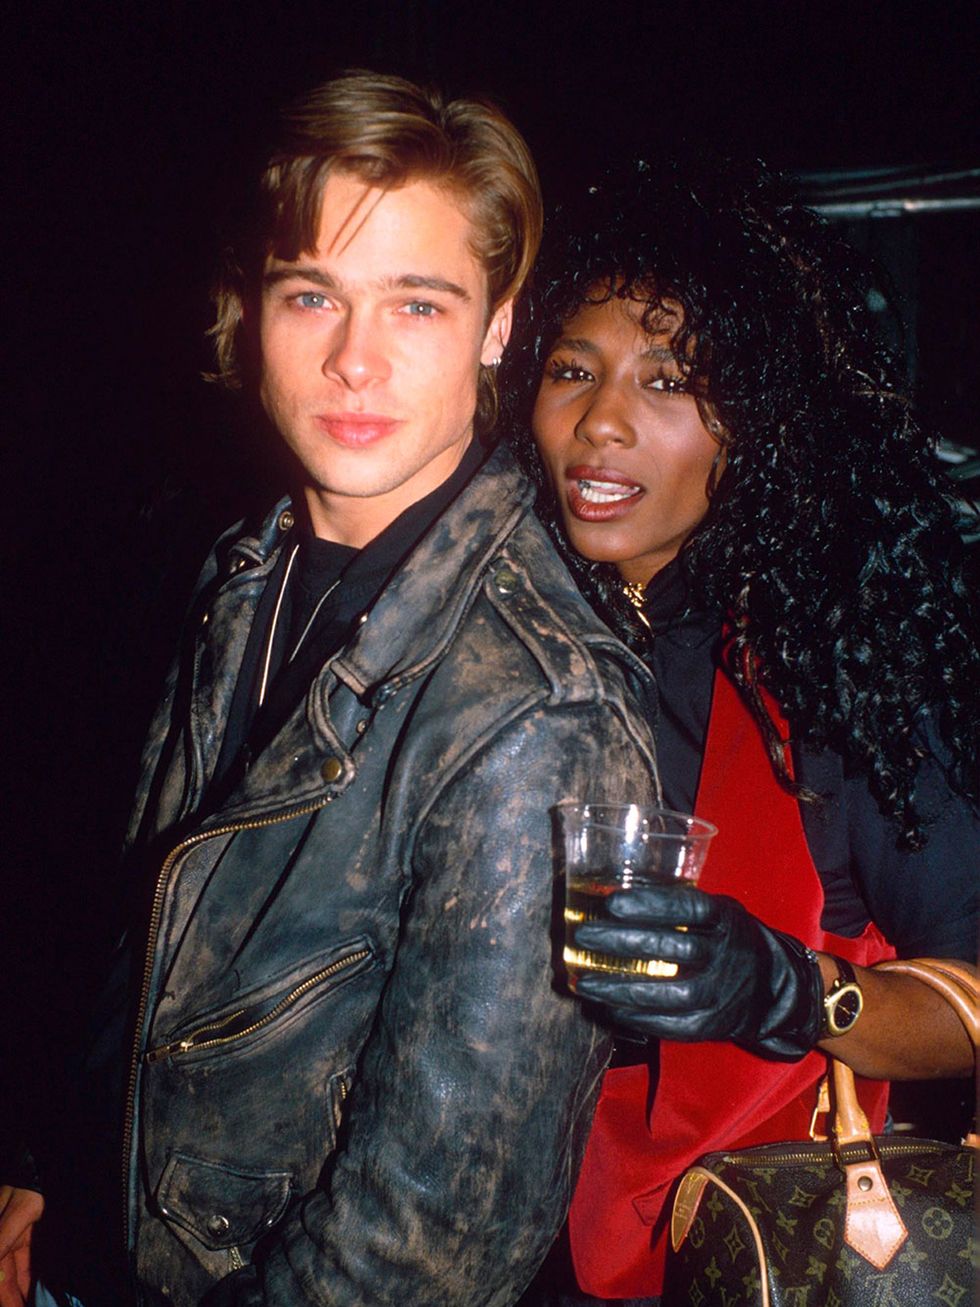 Jacket, Hairstyle, Leather jacket, Leather, Cool, Bag, Black hair, Jheri curl, Flash photography, Alcohol, 